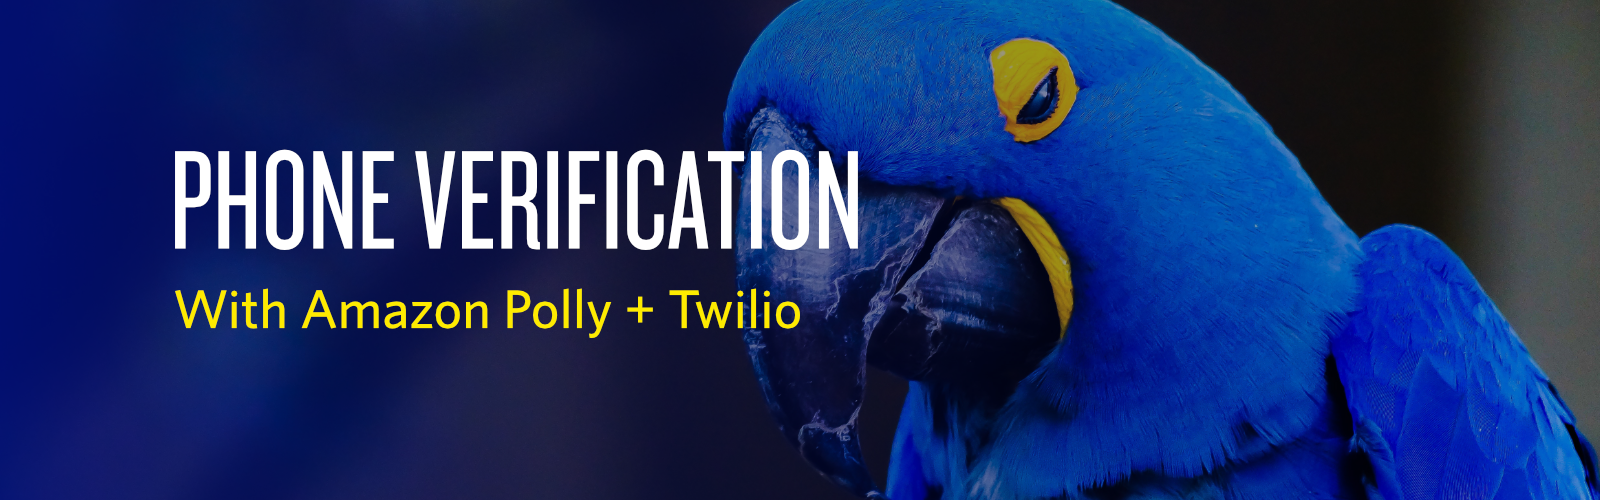 phone-verification-aws-polly-twilio-cover-photo.png